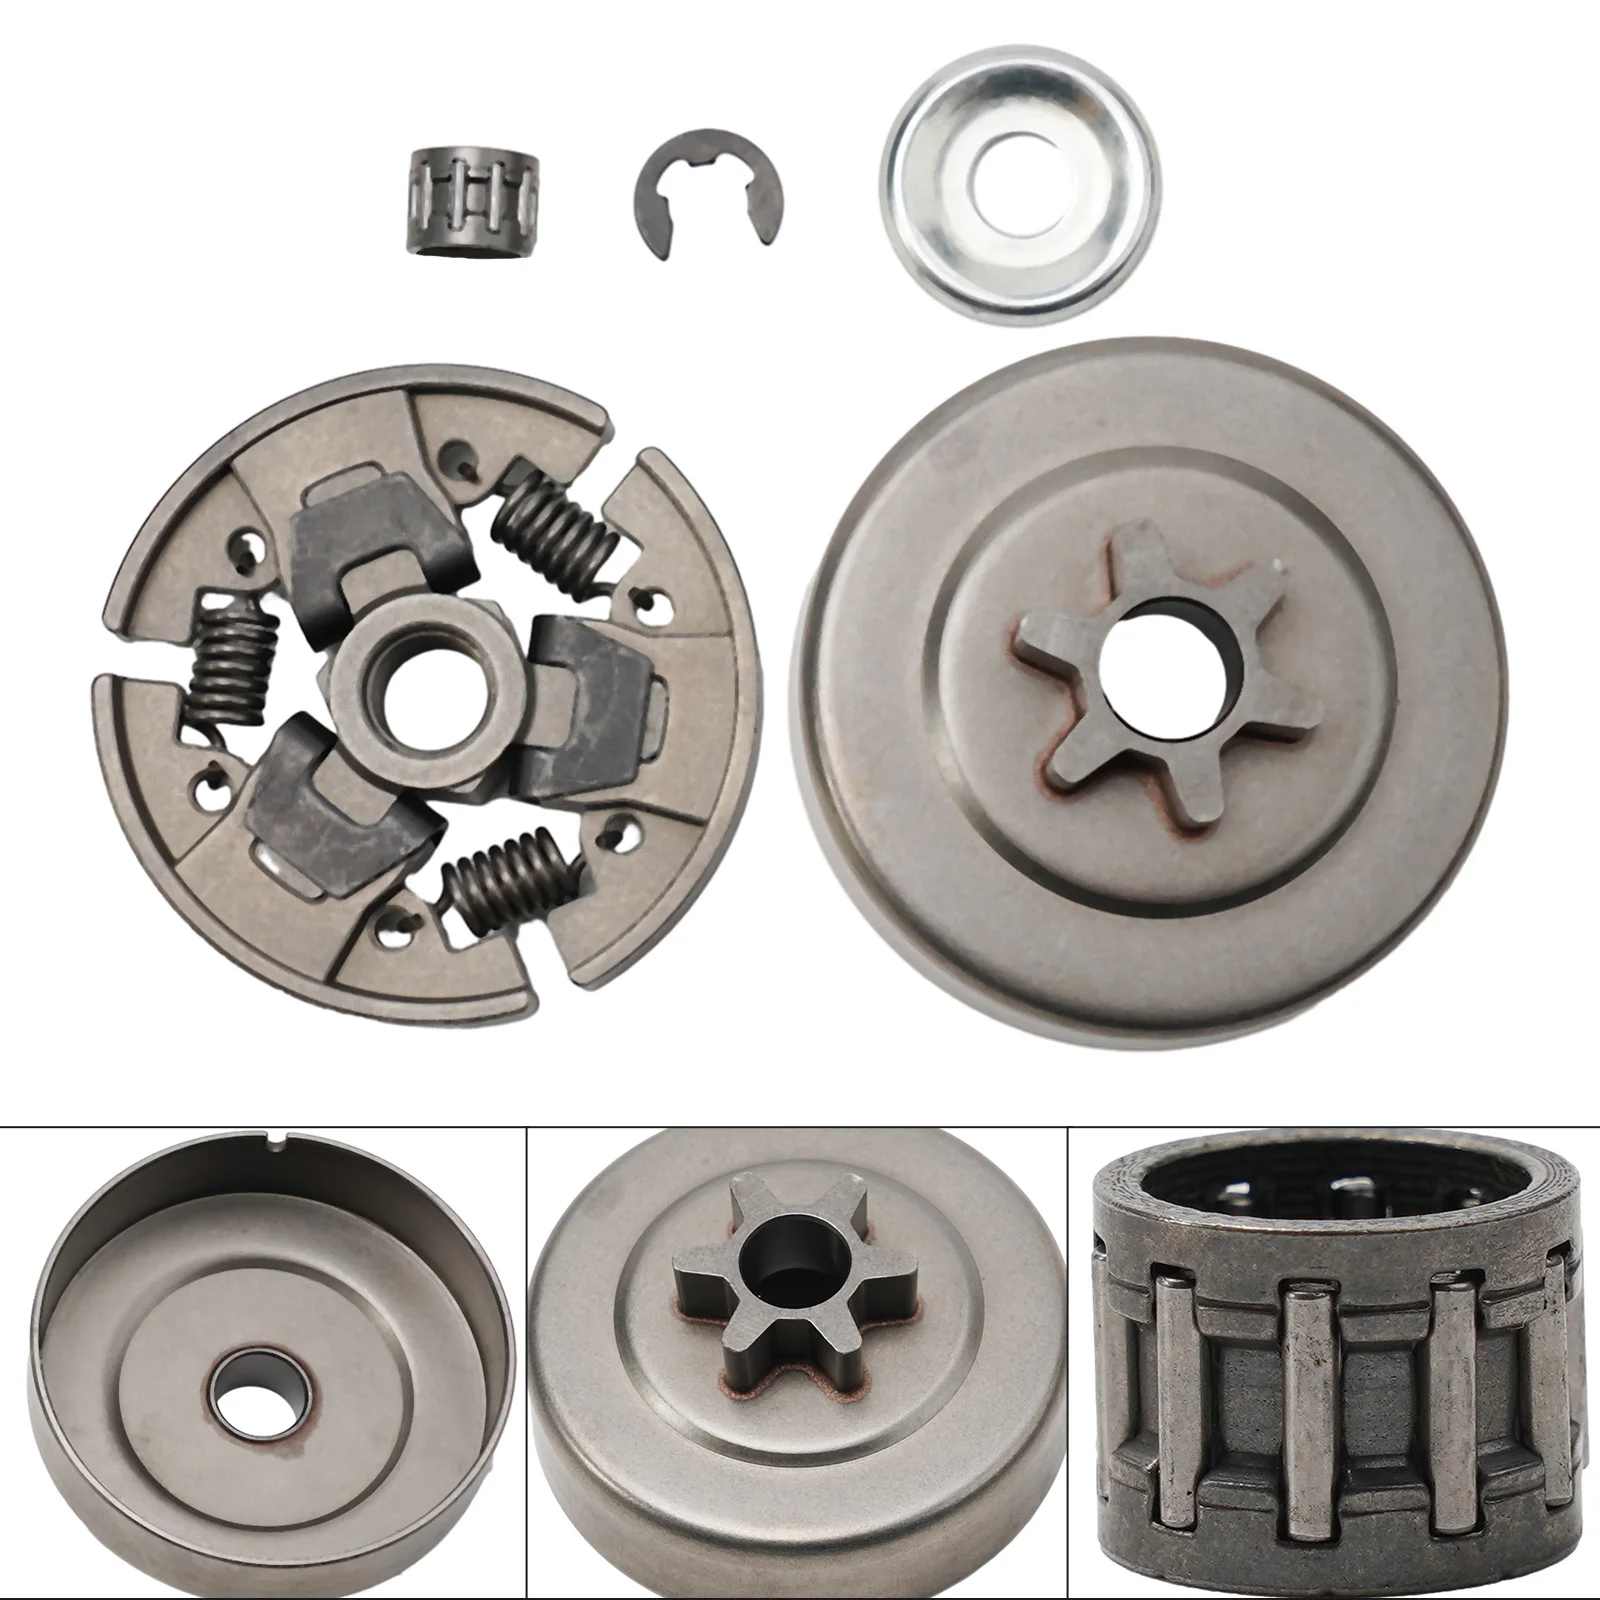 Clutch Spur Sprocket Drum Kit For Stihl 017 018 021 023 025 MS170 MS180 M S210 230 250 Chainsaw Replace 11236402003 95129332260